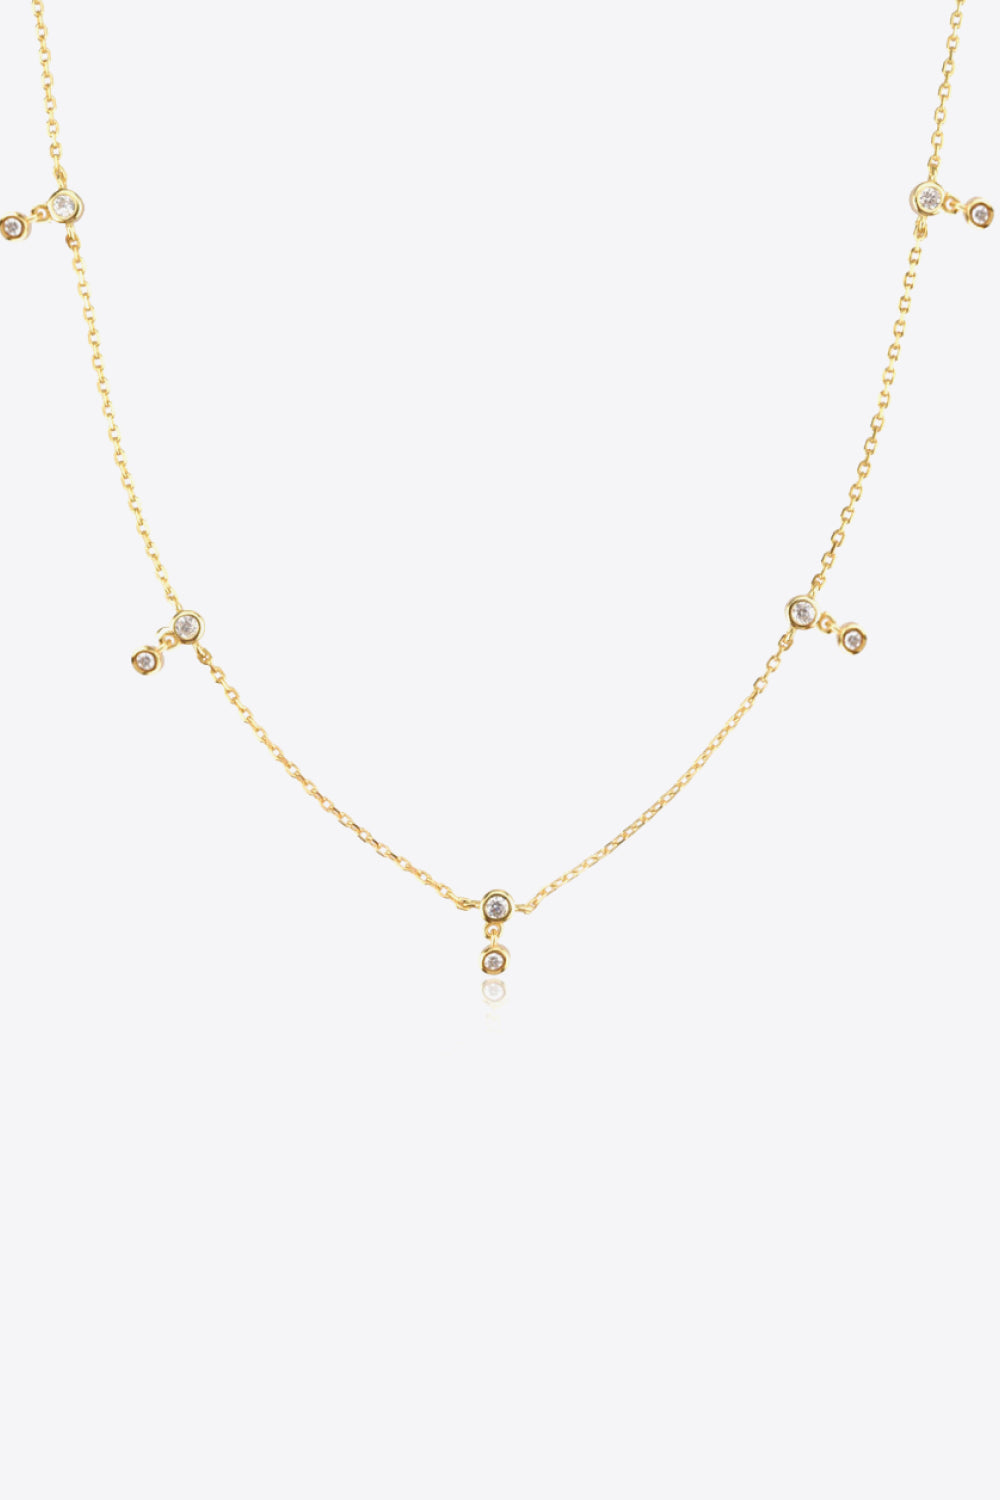 Zircon 925 Sterling Silver Necklace - Guy Christopher 